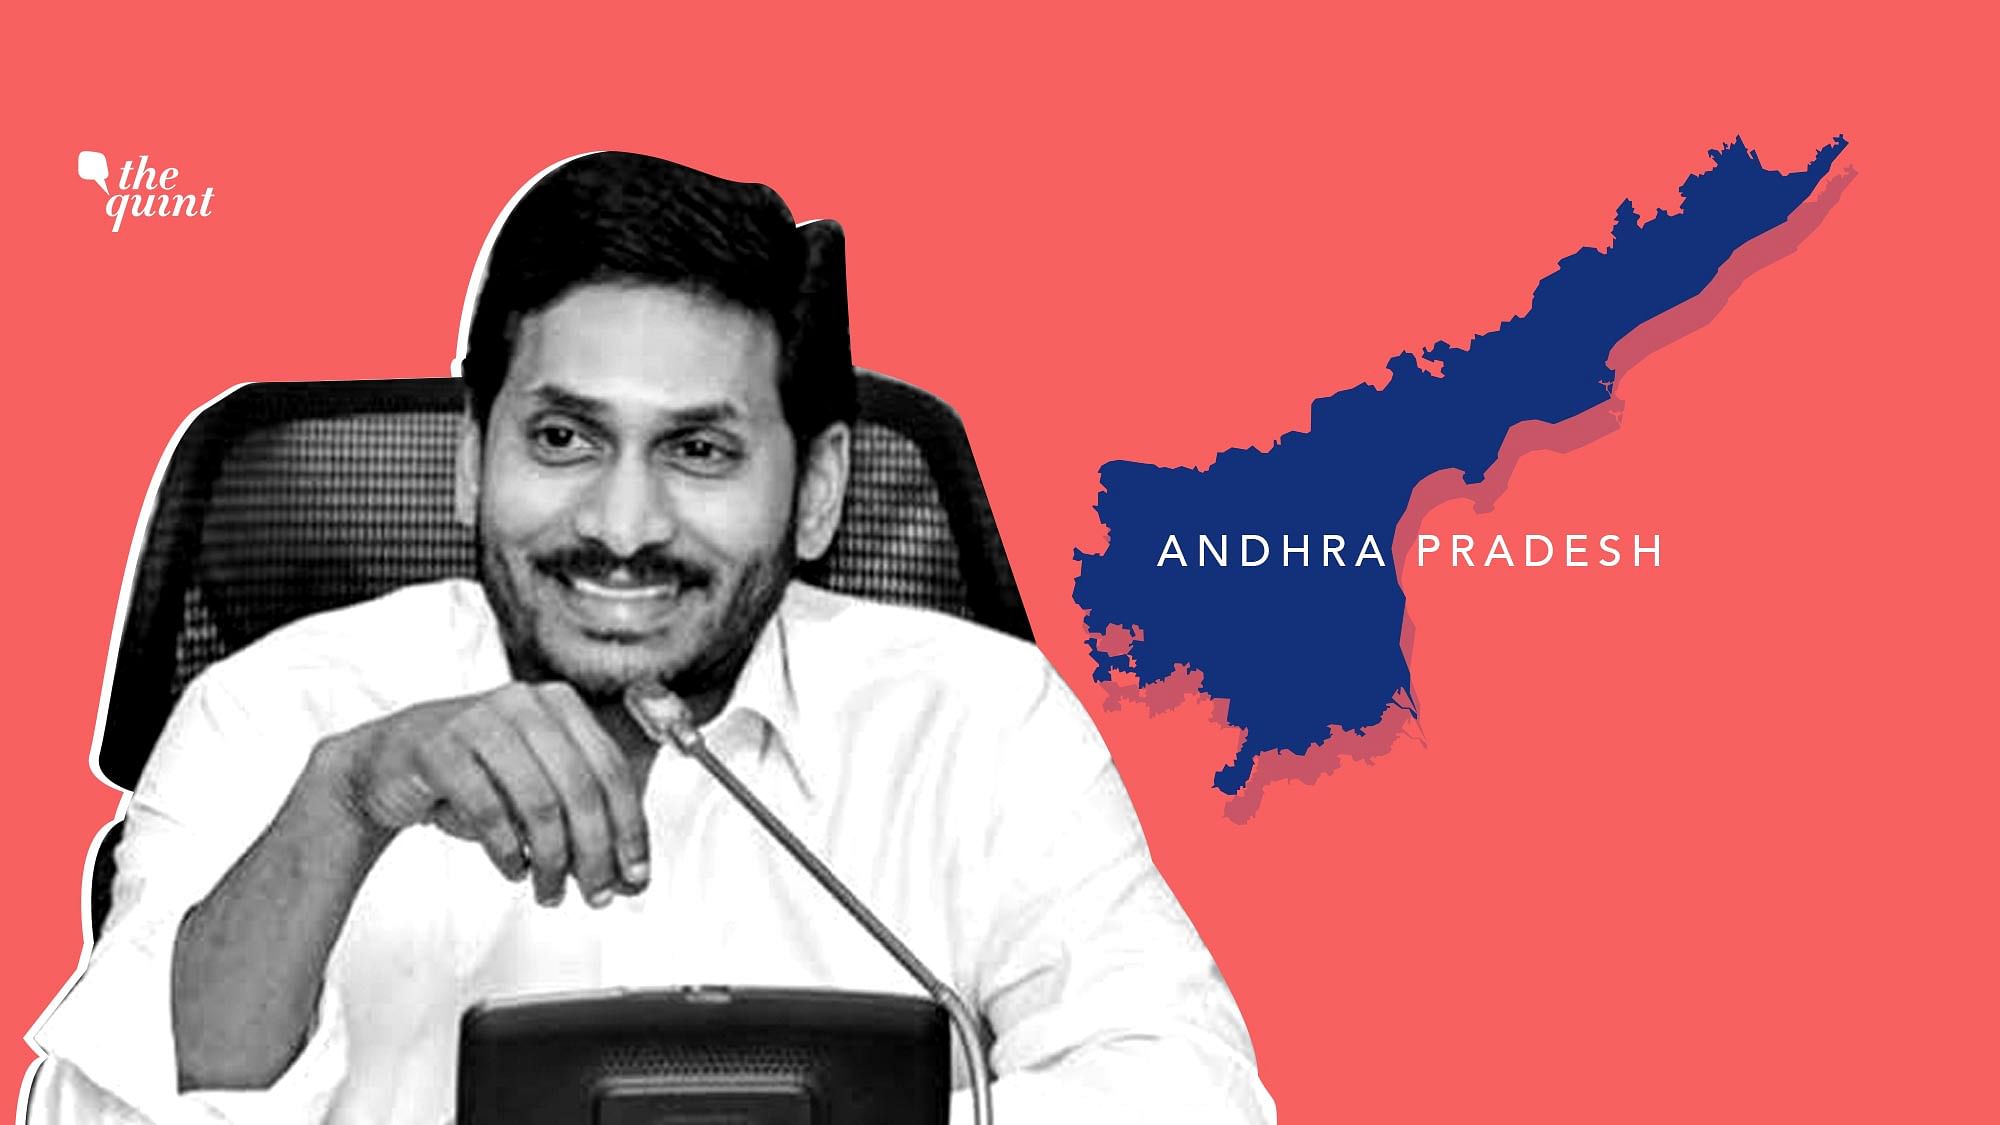 Image of Chief Minister Jagan Reddy and Andhra Pradesh map used for representational purposes.